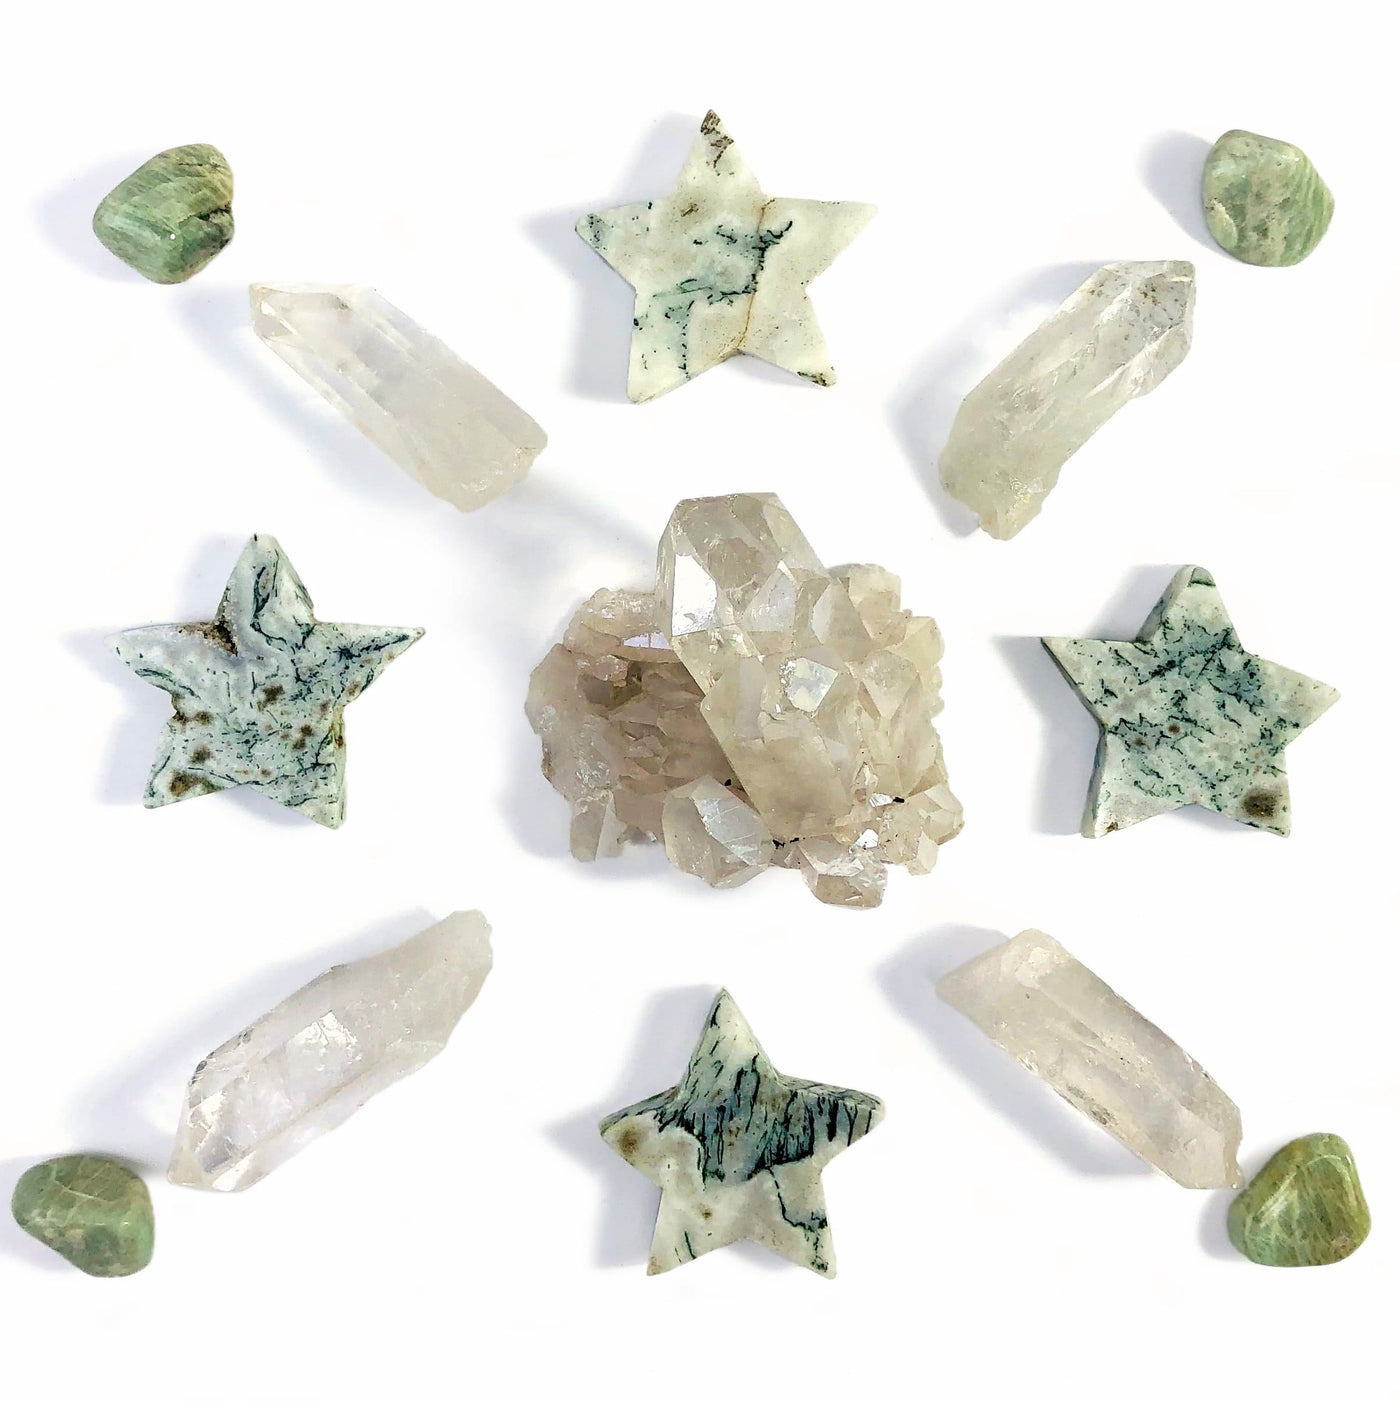 Moss Agate Gemstone Star Shaped Slices in a grid design